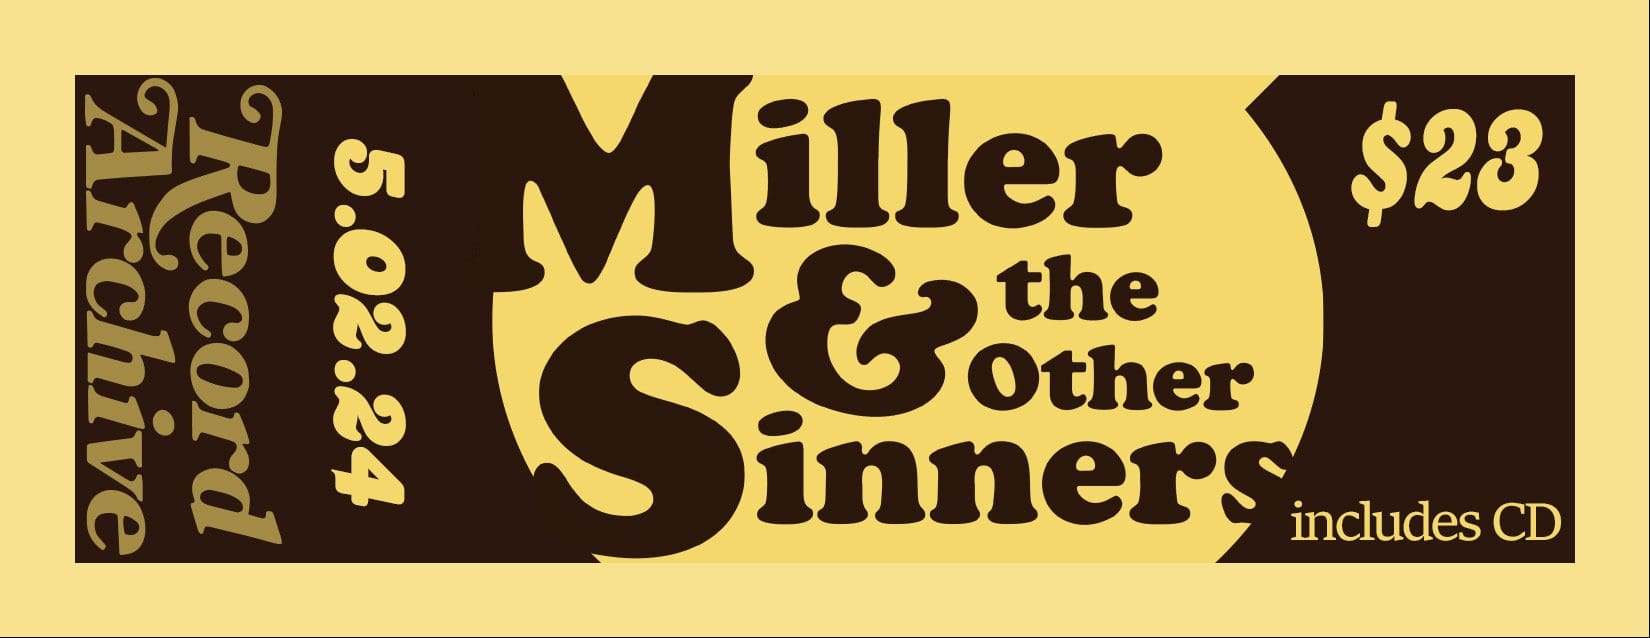 Miller & The Other Sinners. 5.02.24 $23. CD Included.